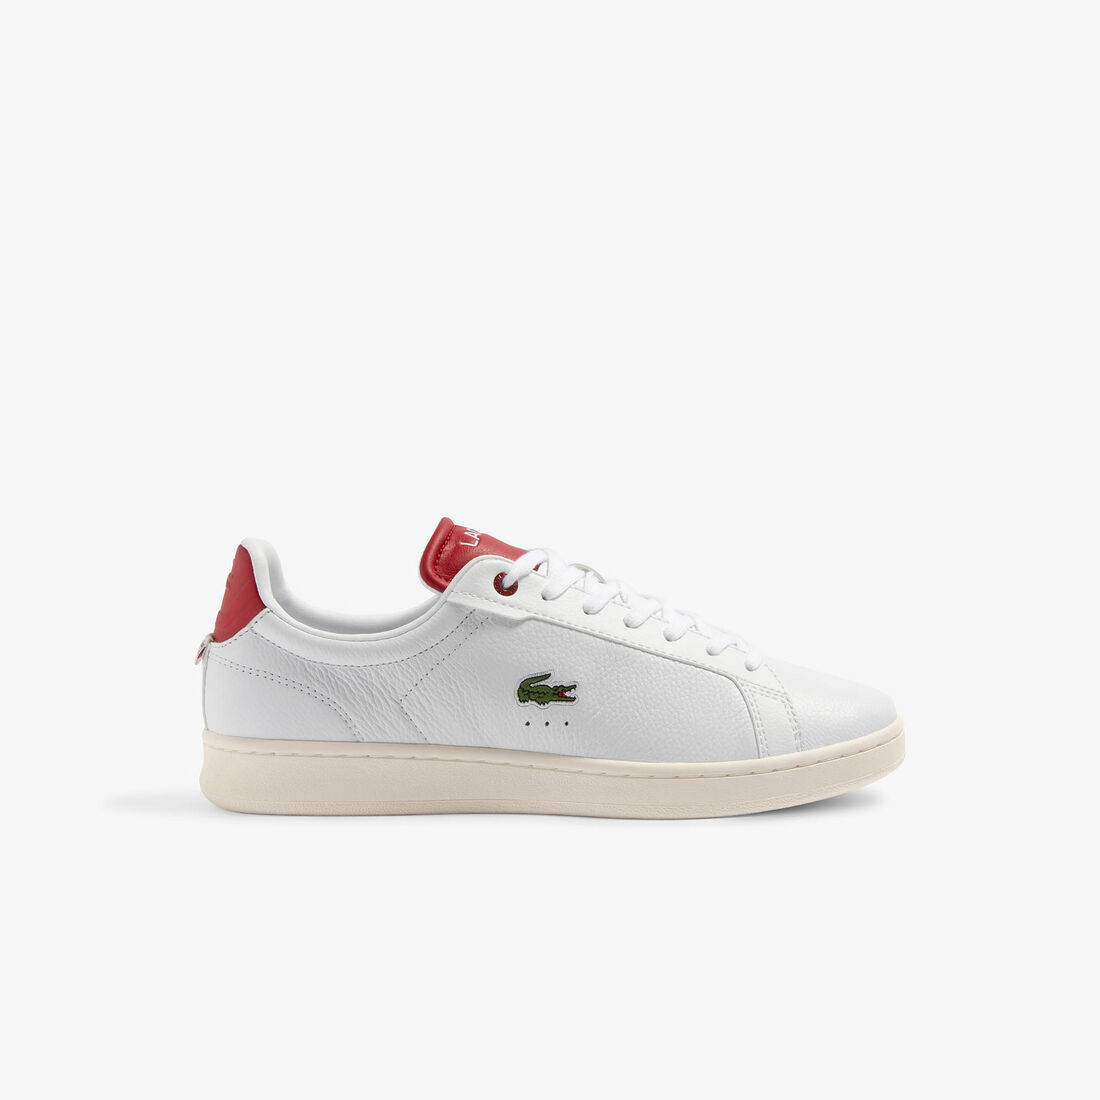 Buy Men's Carnaby Pro Heel Detail Leather Trainers | Lacoste UAE